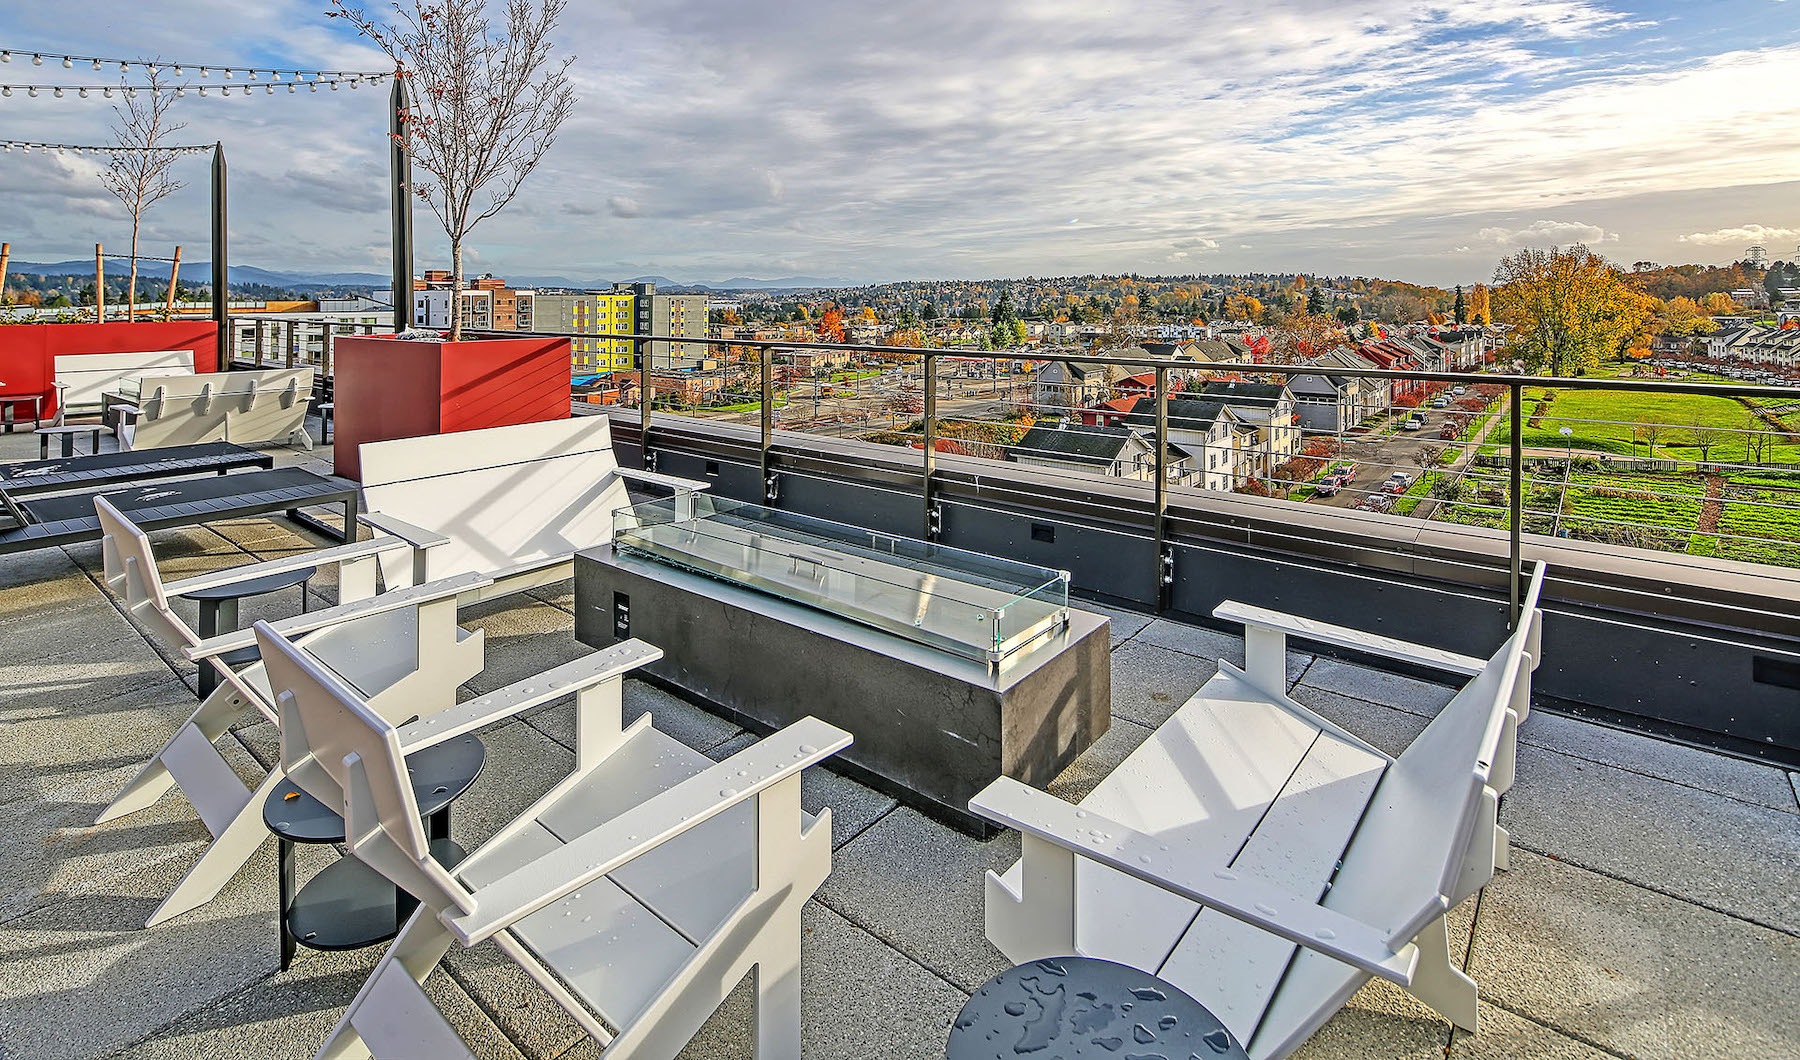 A view from the rooftop deck with entertainment space and outdoor lounge seating